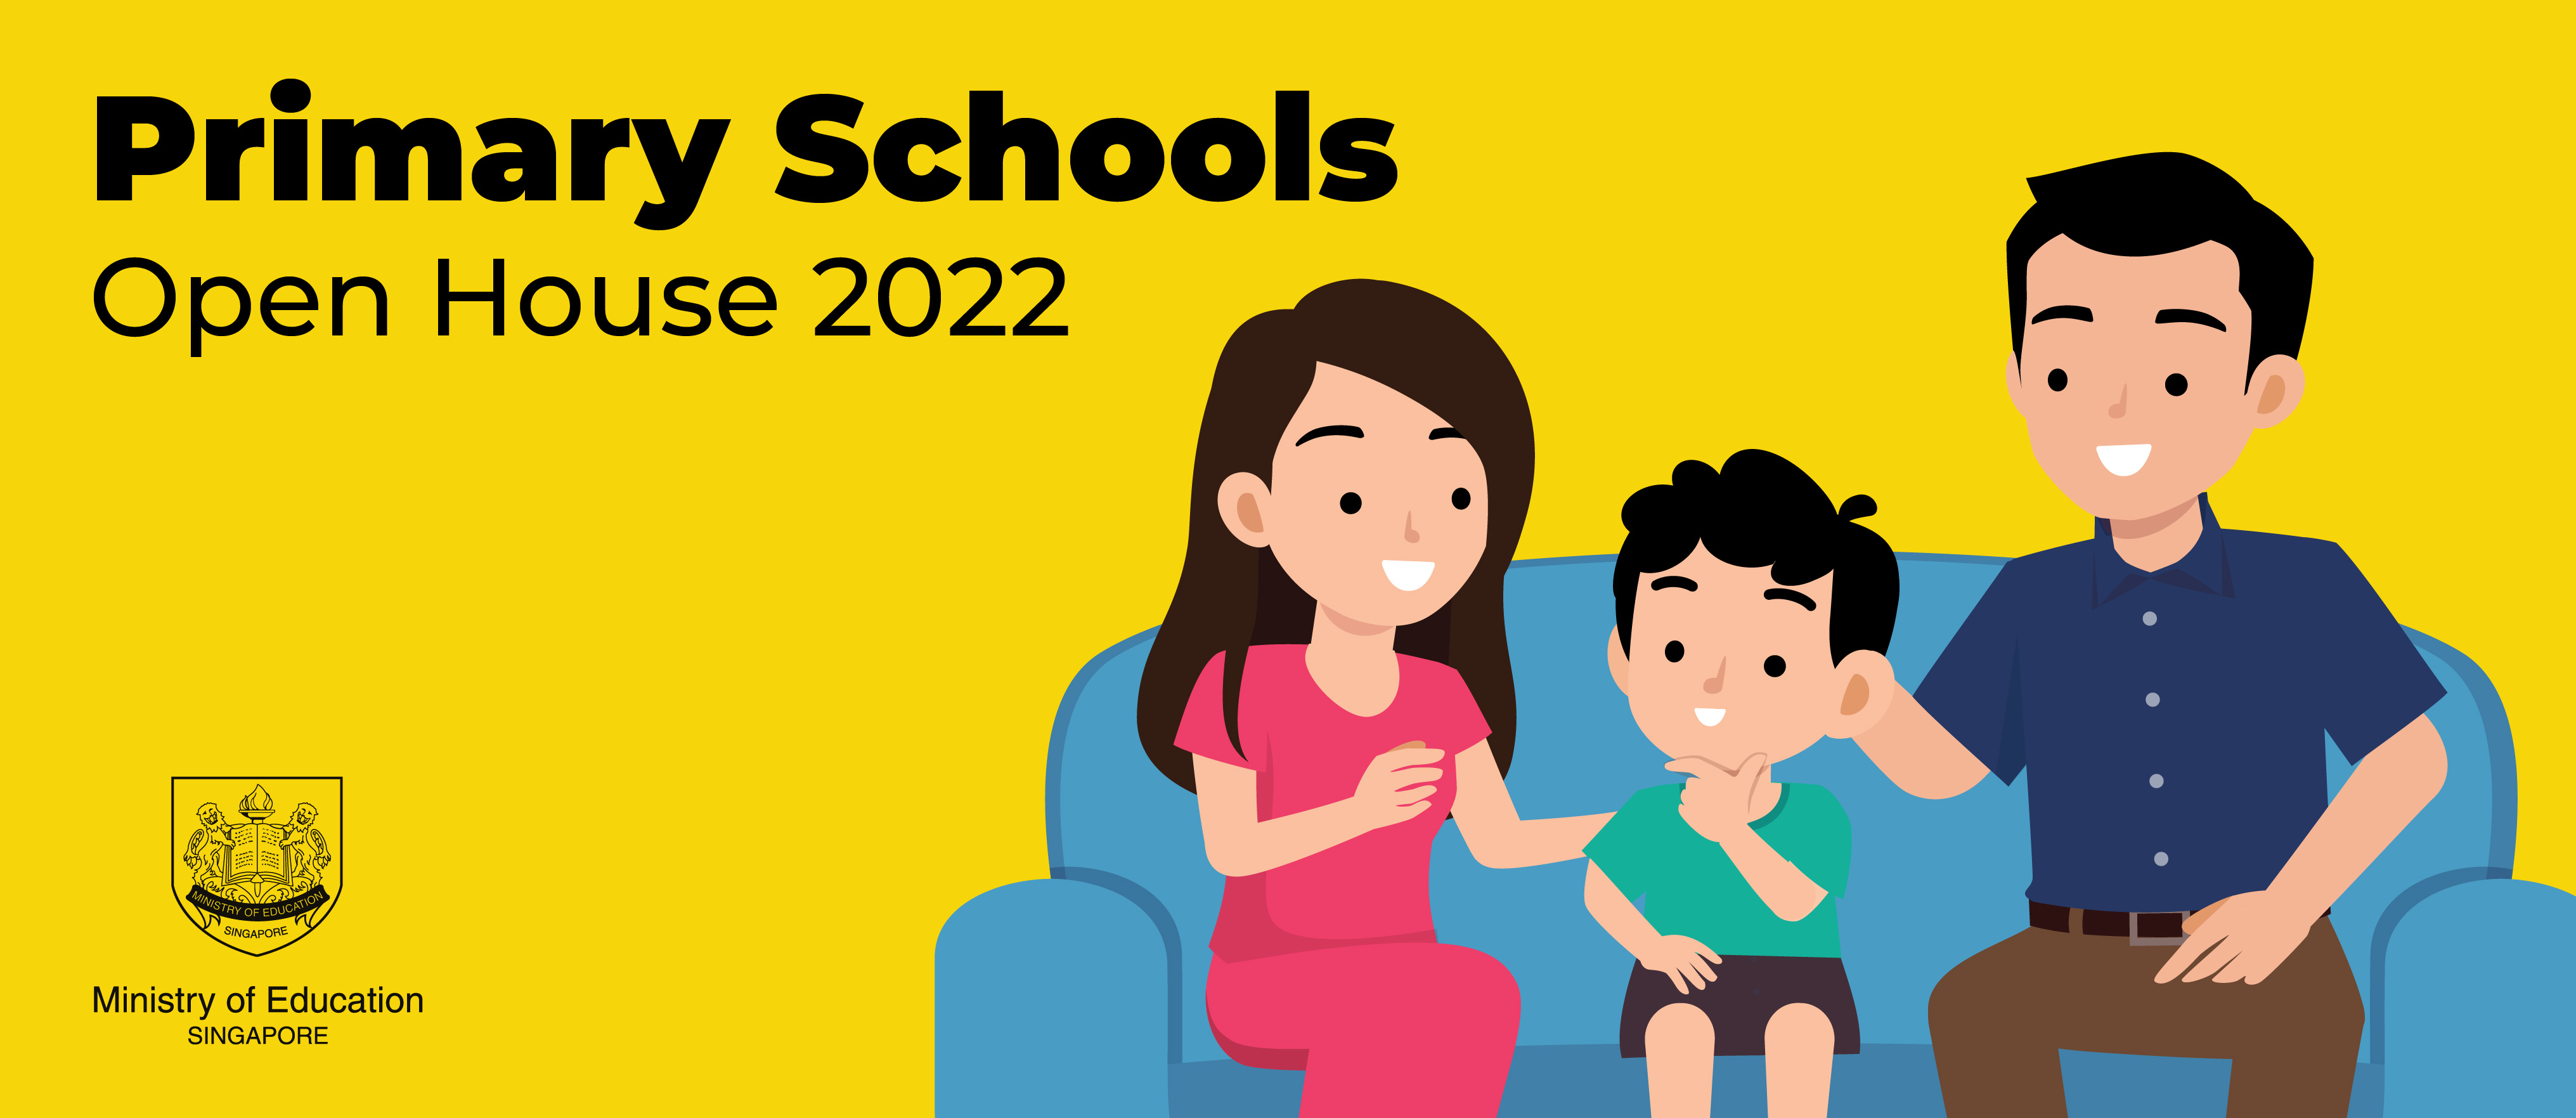 Open House for Primary Schools 2022